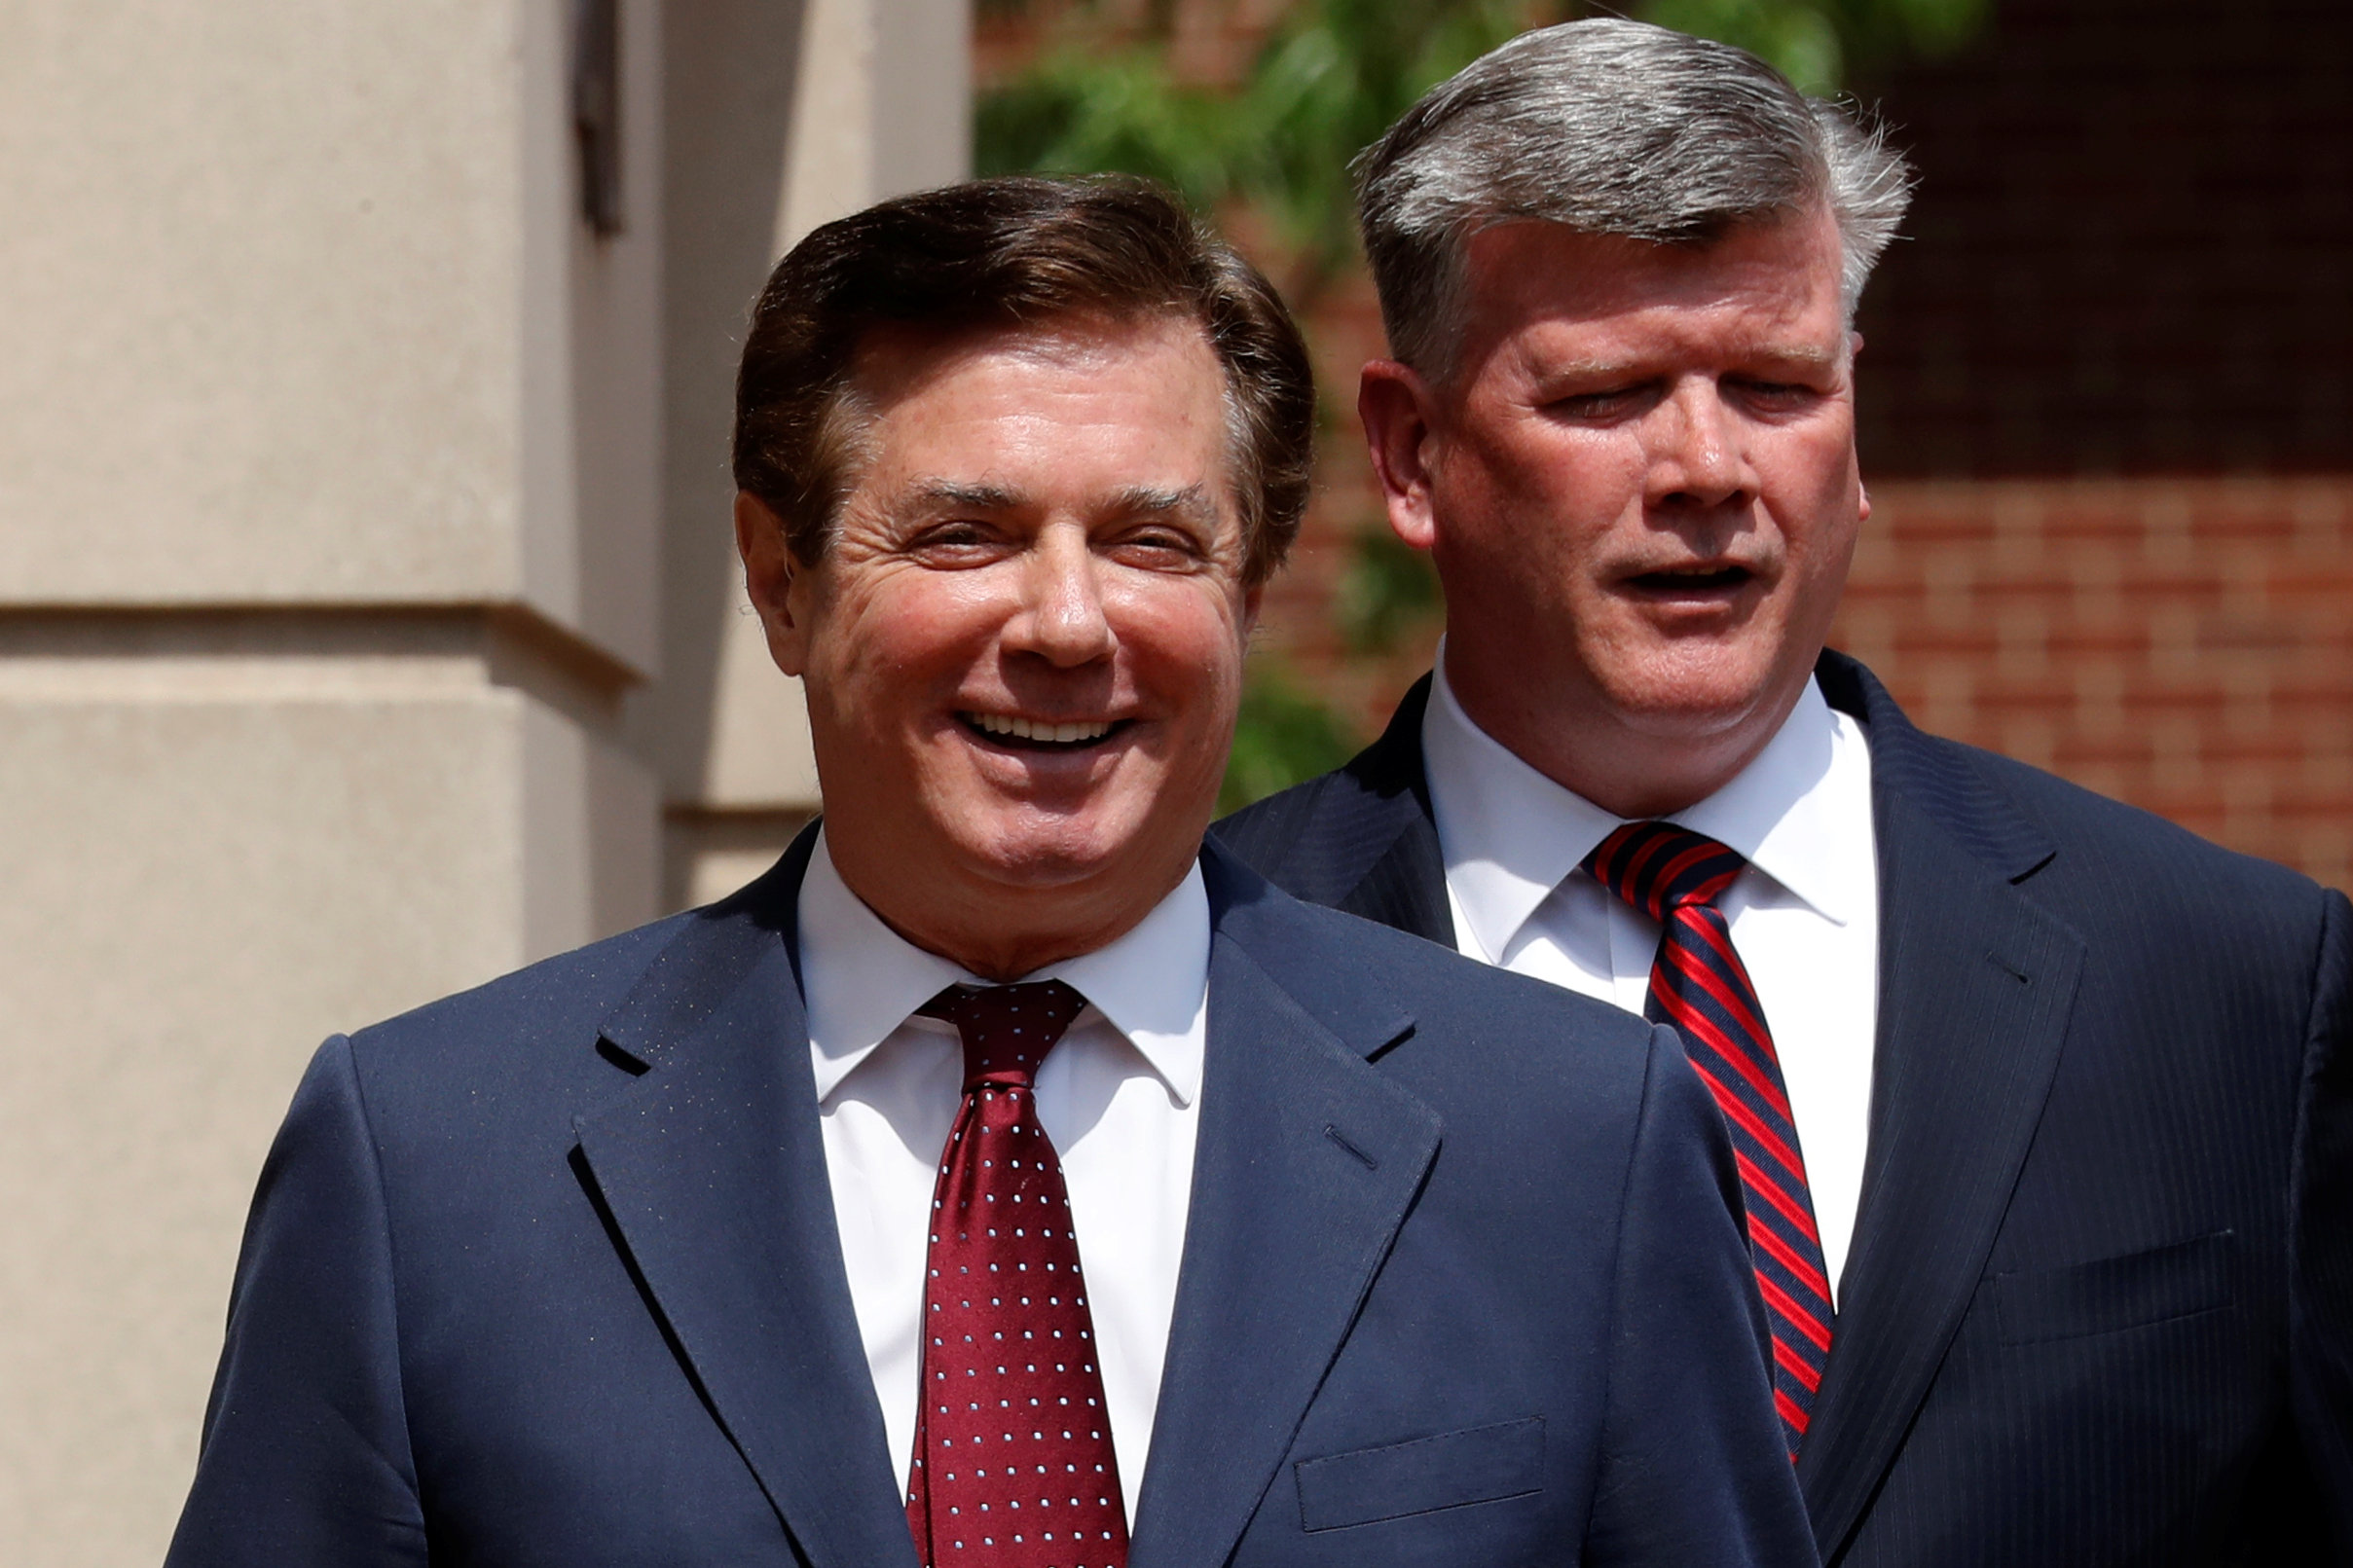 PHOTO: President Trump's former campaign manager Paul Manafort smiles as he and his attorney Kevin Downing depart U.S. District Court after a motions hearing in Alexandria, Va., May 4, 2018.